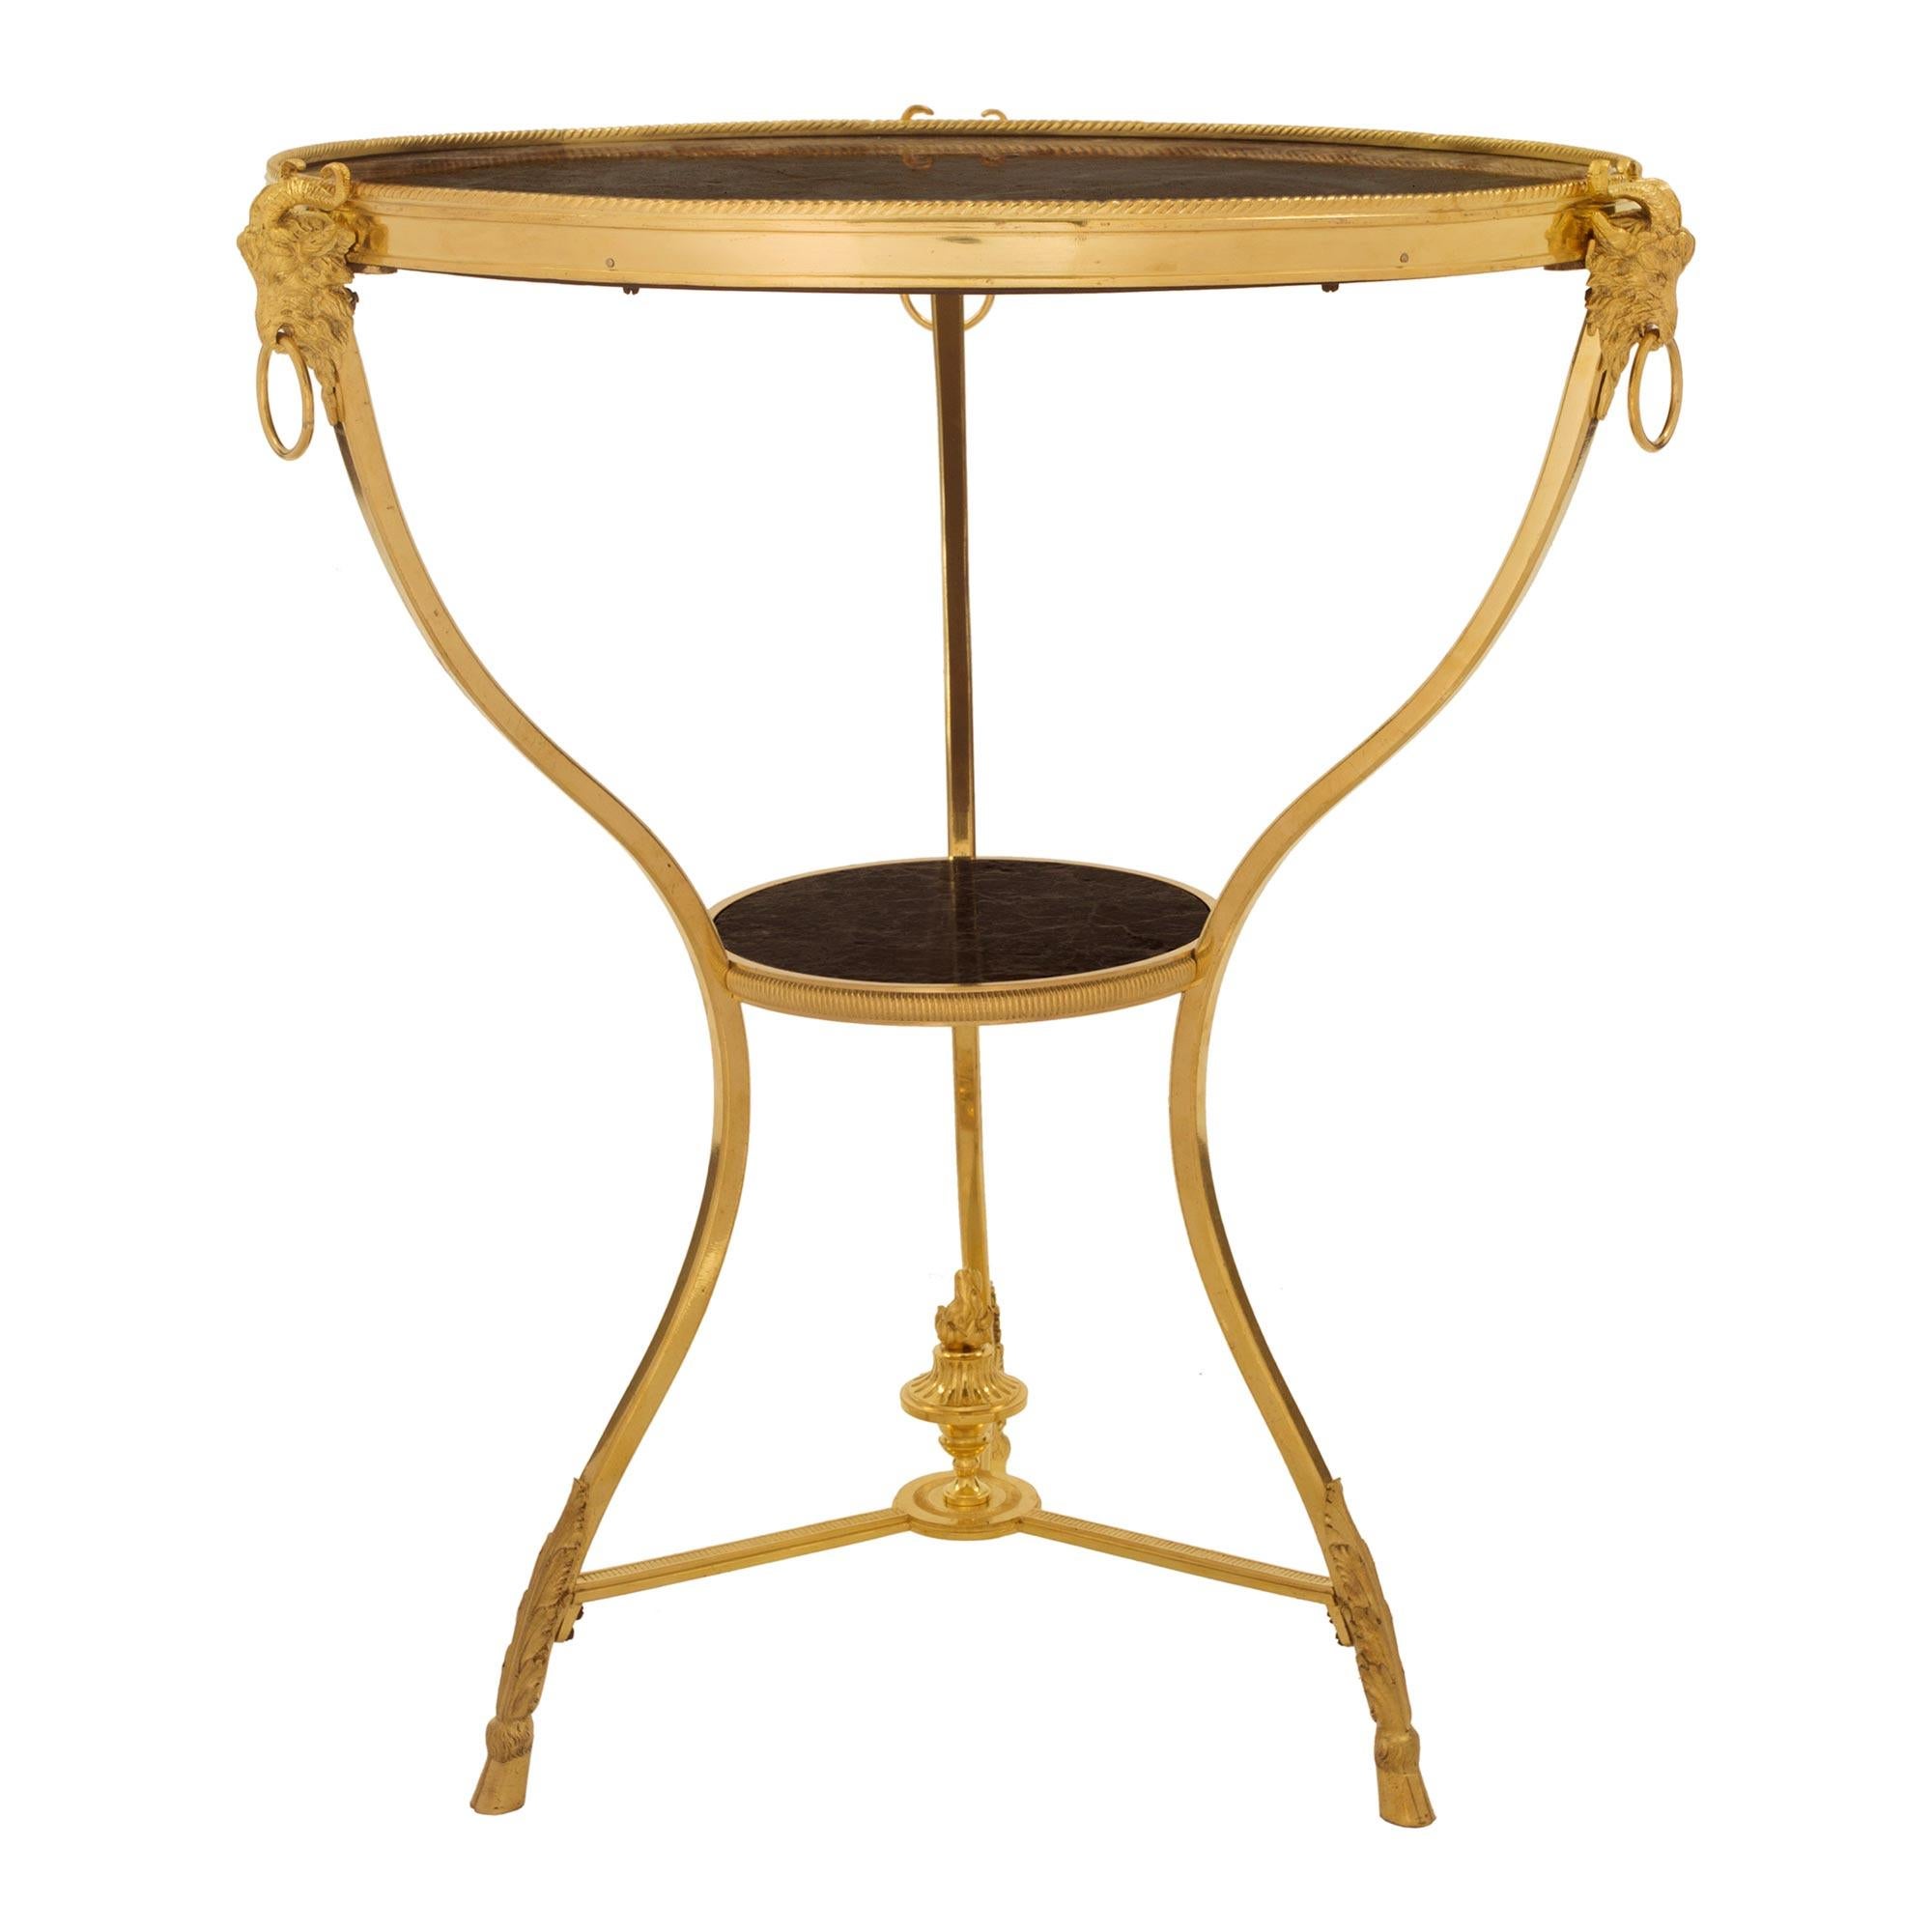 An elegant French 19th century Louis XVI st. ormolu and Vert de Patricia marble Guéridon side table. The table is raised by fine hoof feet below richly chased acanthus leaves in a fine satin and burnished finish. The slender S scrolled legs display